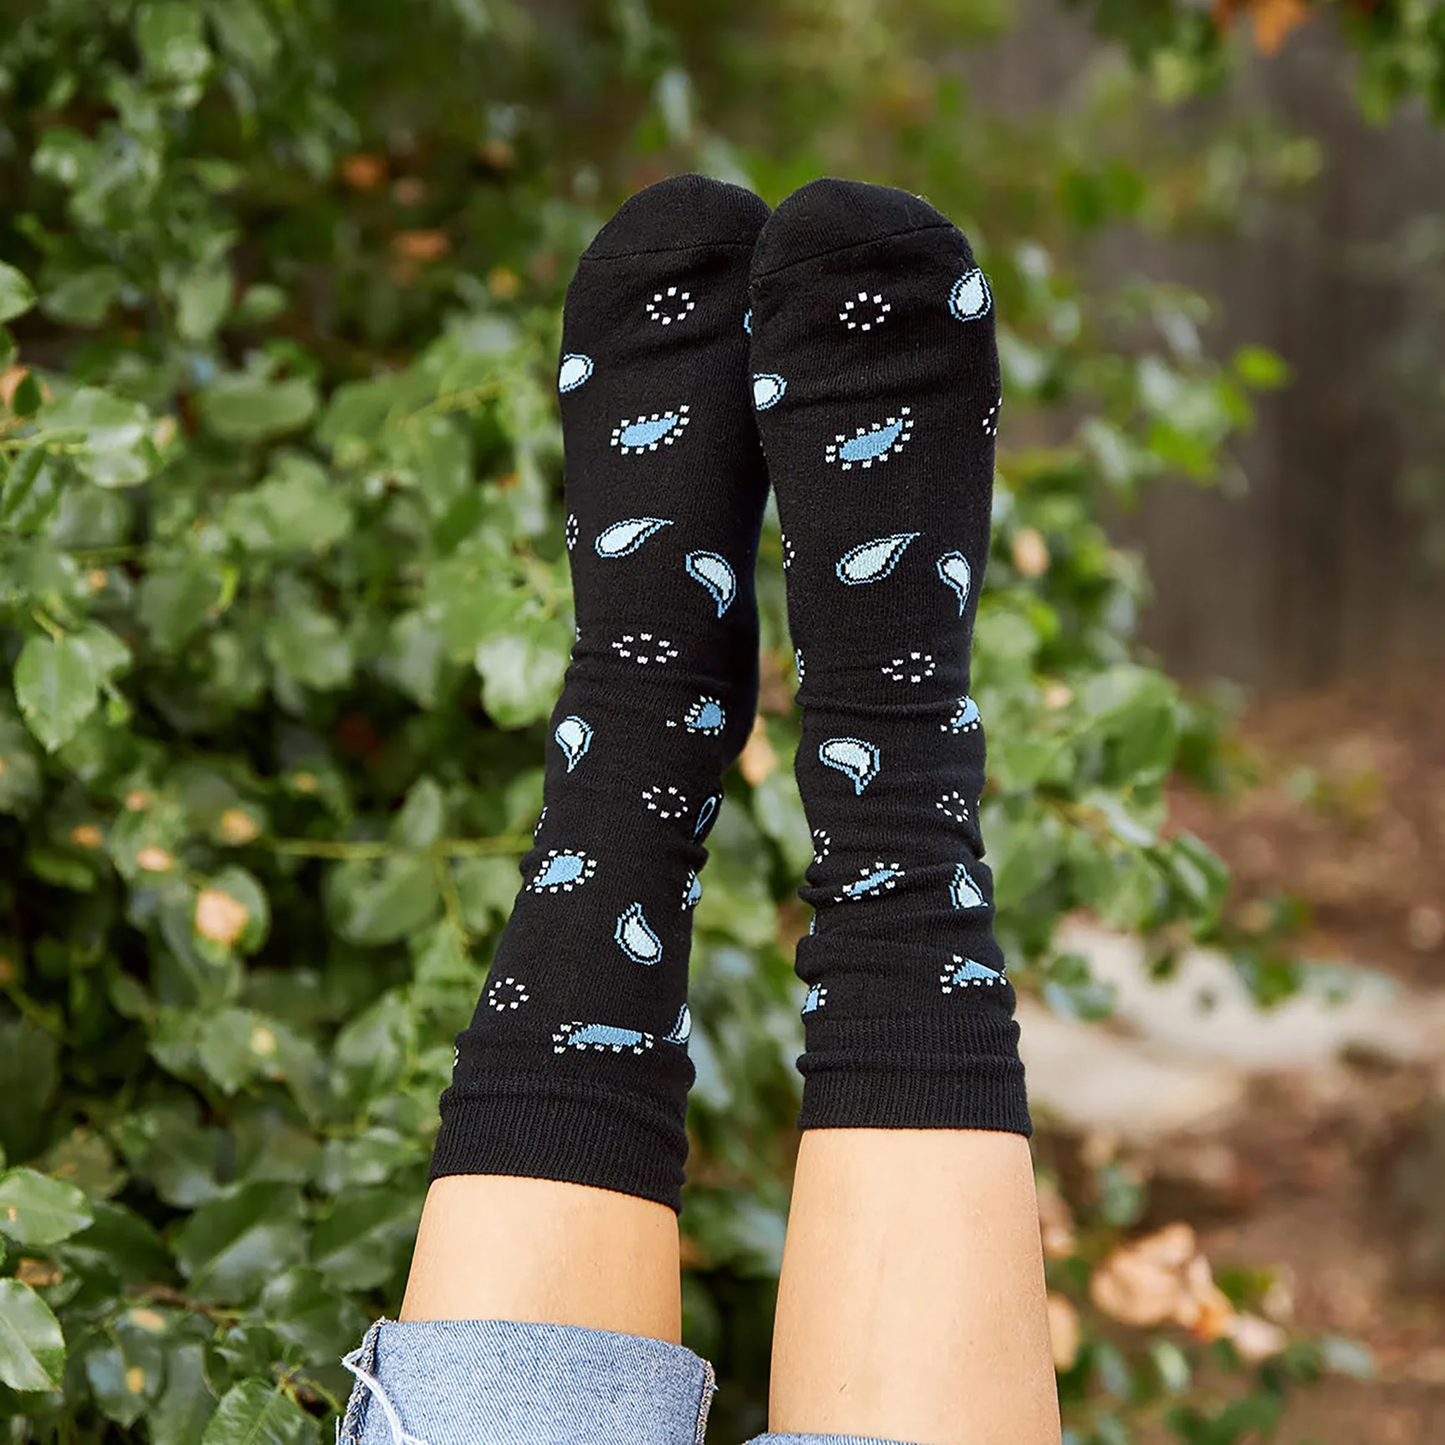 Conscious Step - Gift Box: Socks that Give Water